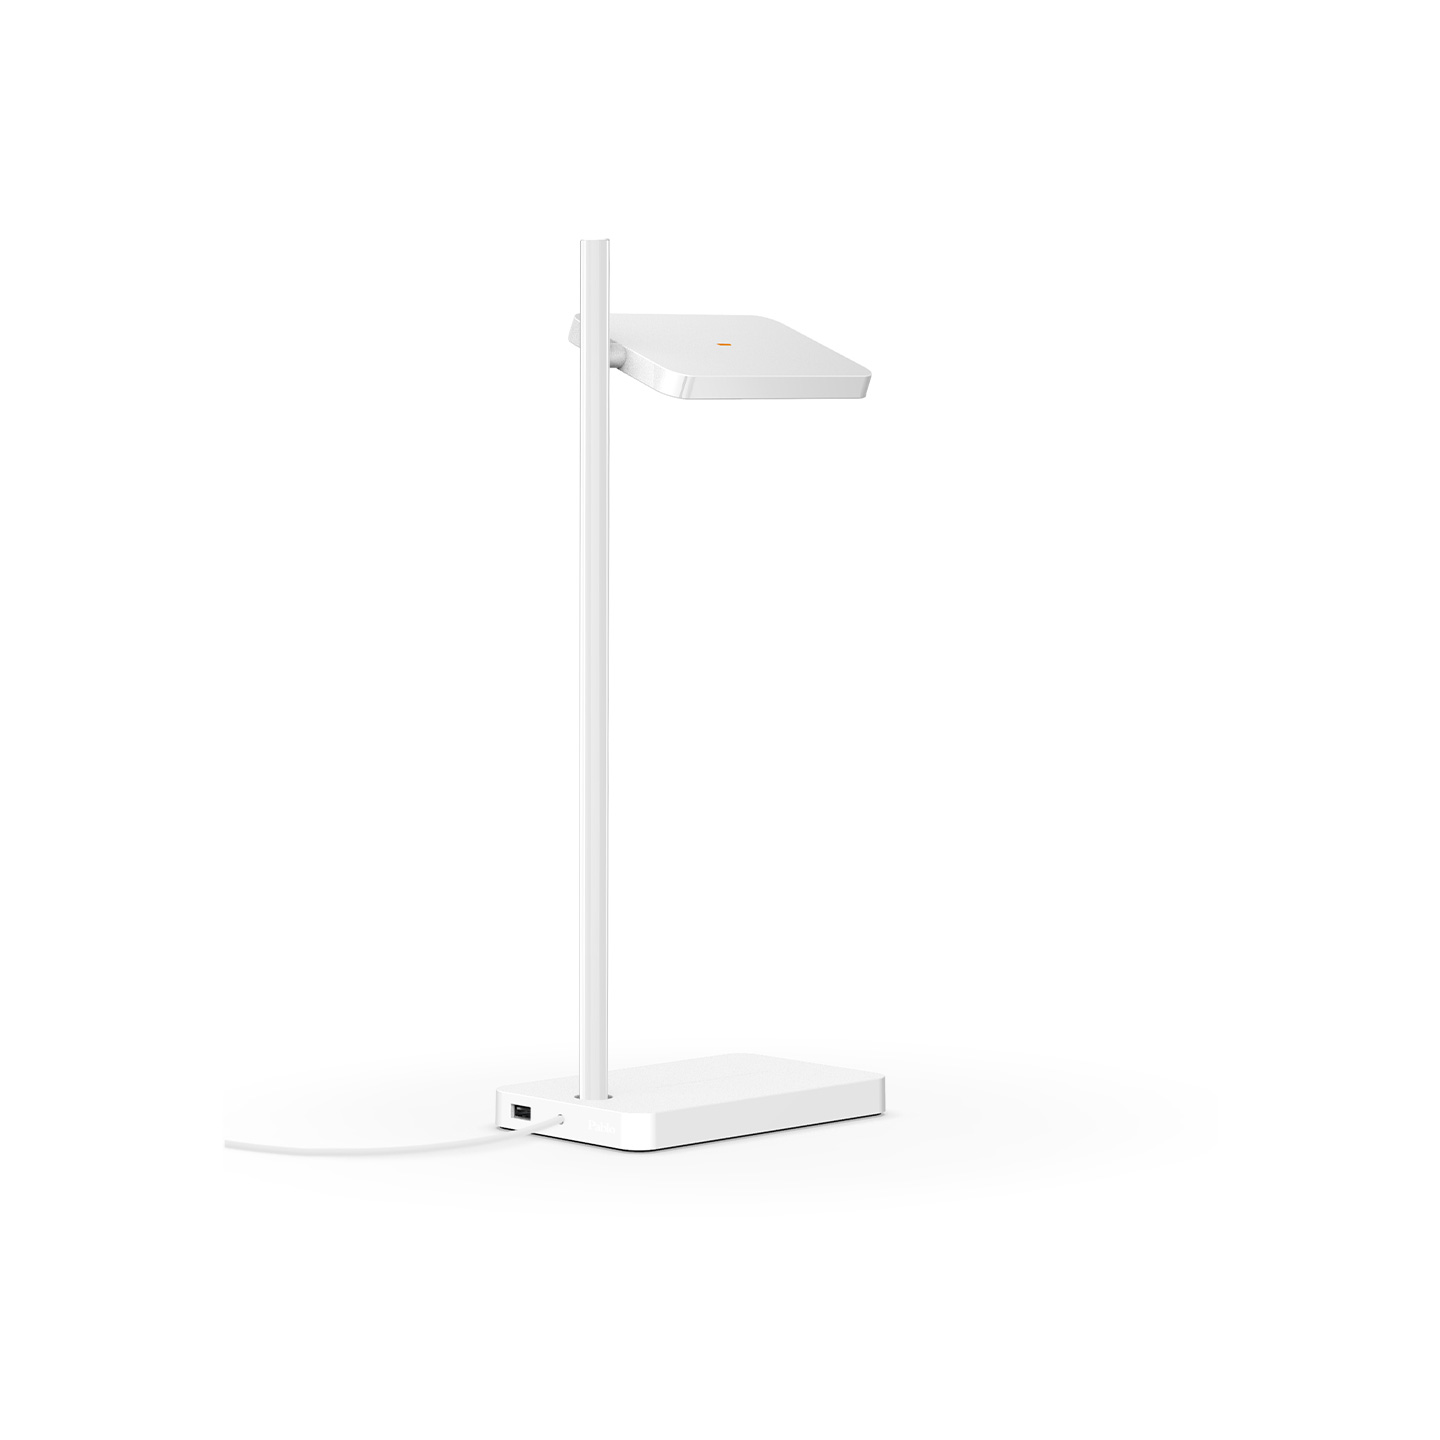 The clean design of the Talia lamp only encompasses the essential elements of its lighting purpose.